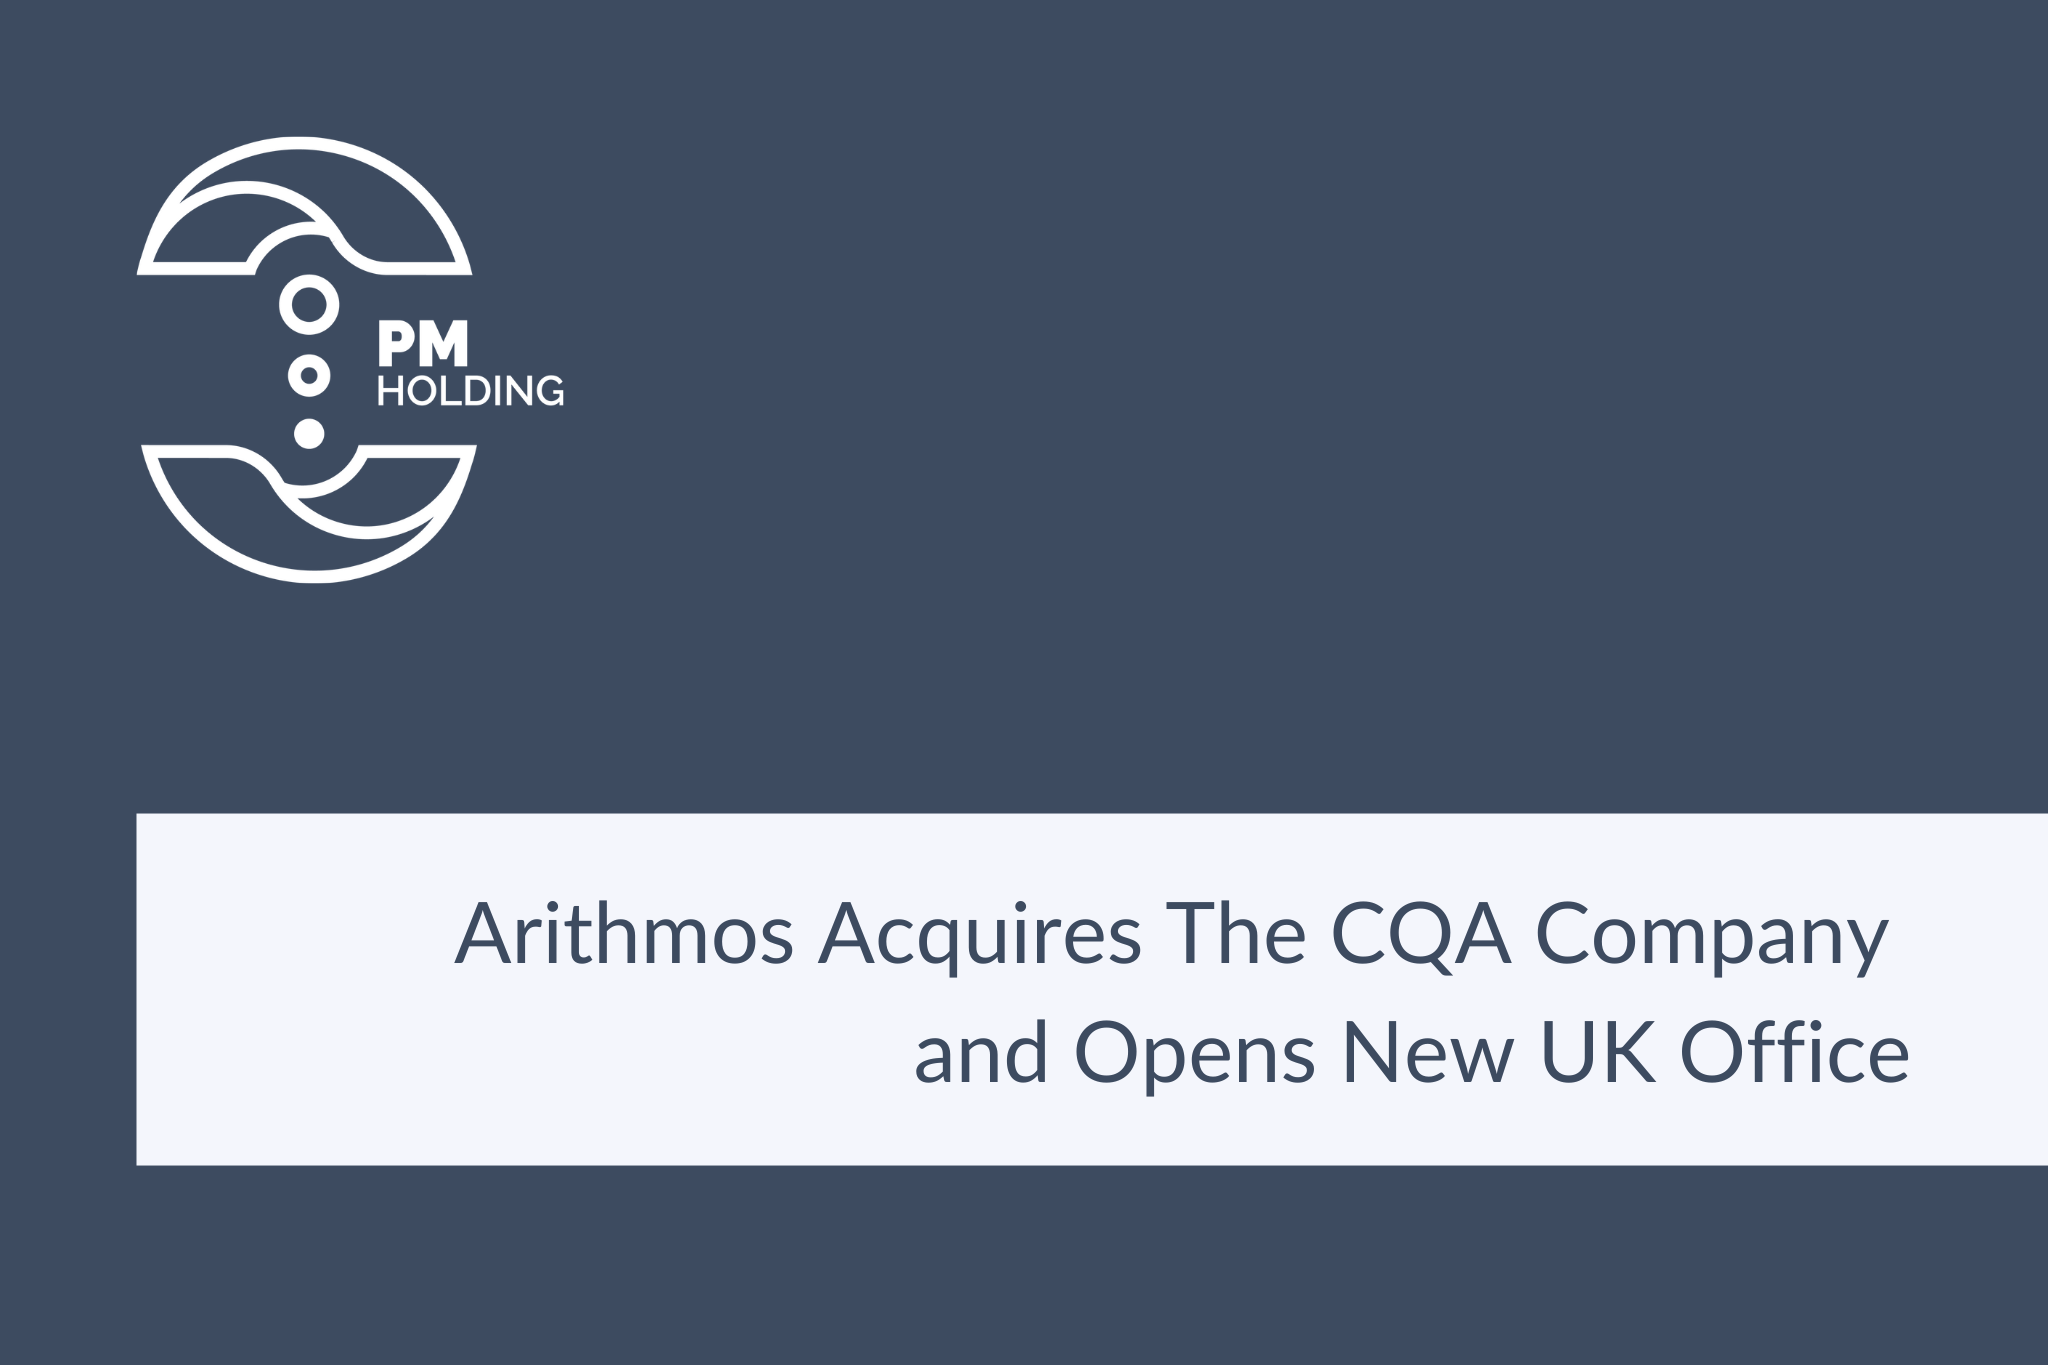 Arithmos Acquires The CQA Company and Opens New UK Office